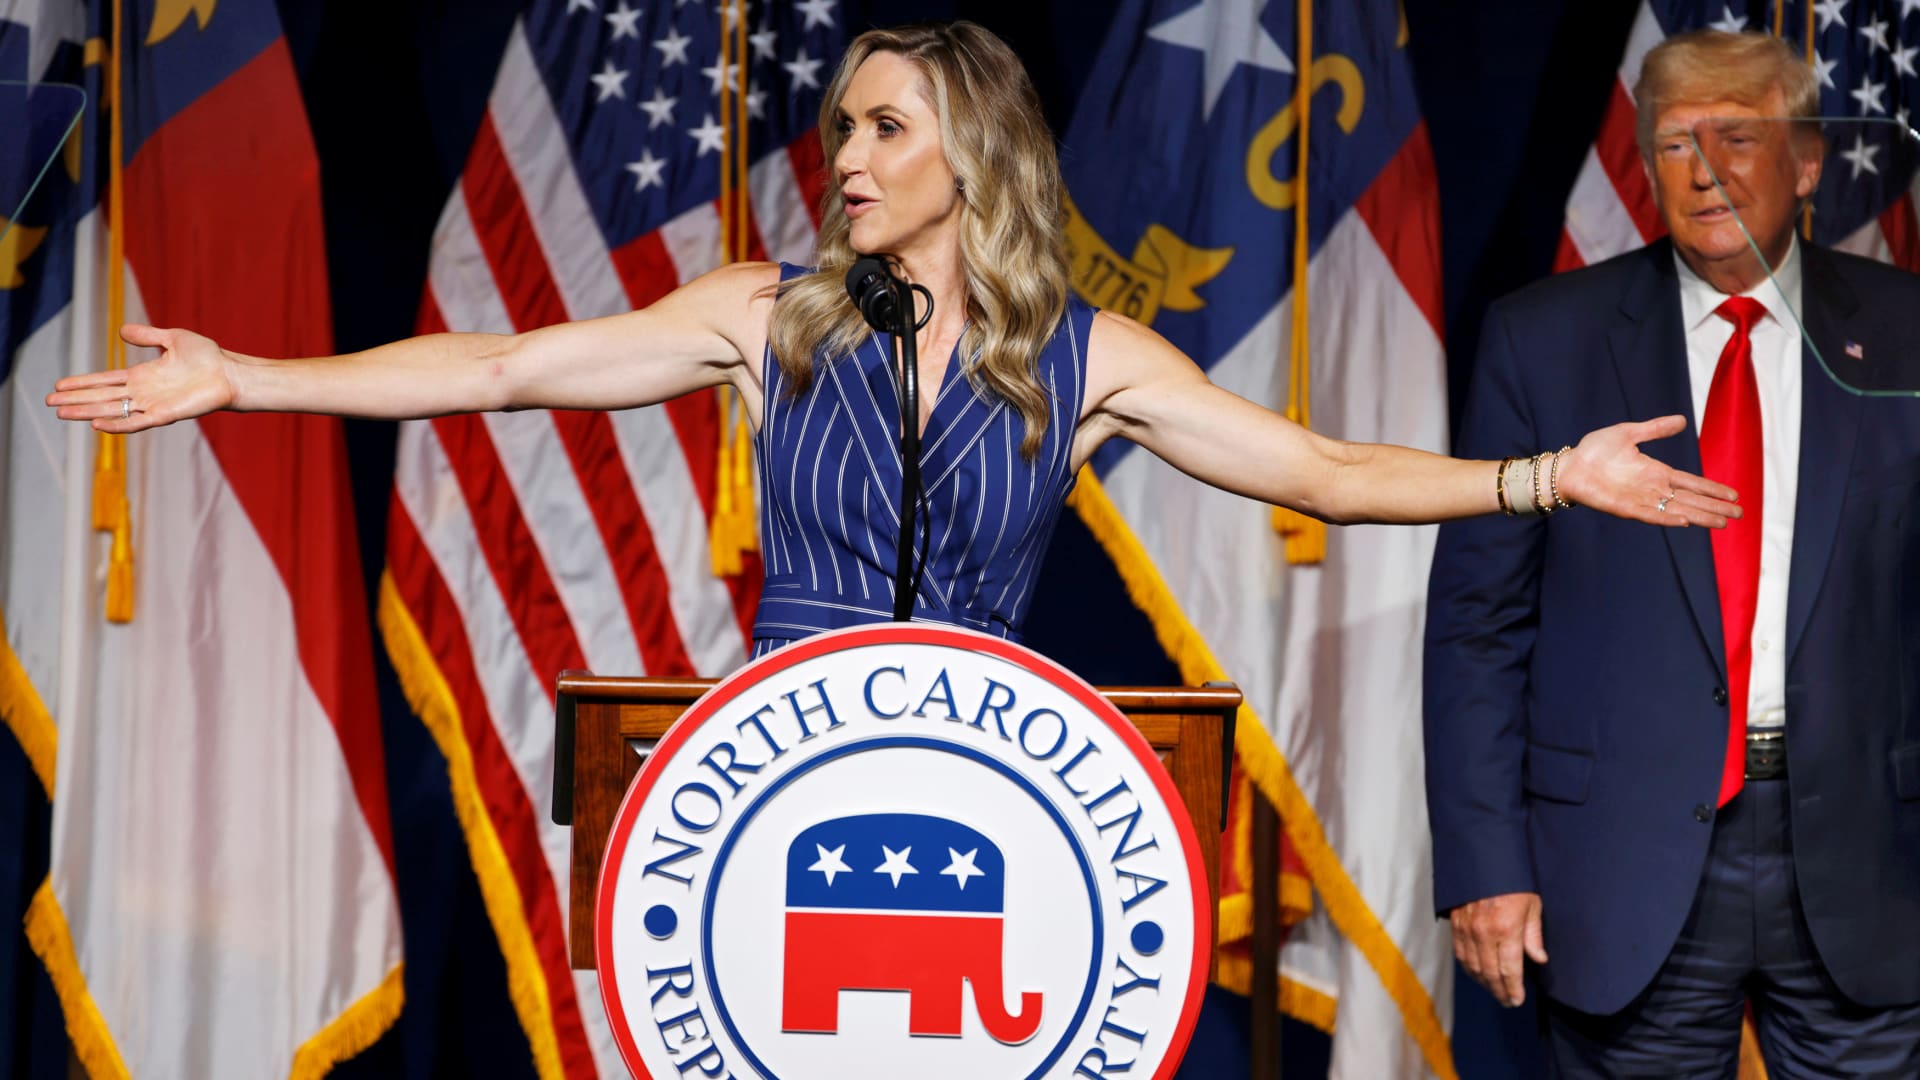 Lara Trump addresses the audience as her father-in-law, former U.S. President Donald Trump, looks on at the North Carolina GOP convention dinner in Greenville, North Carolina, U.S. June 5, 2021. 